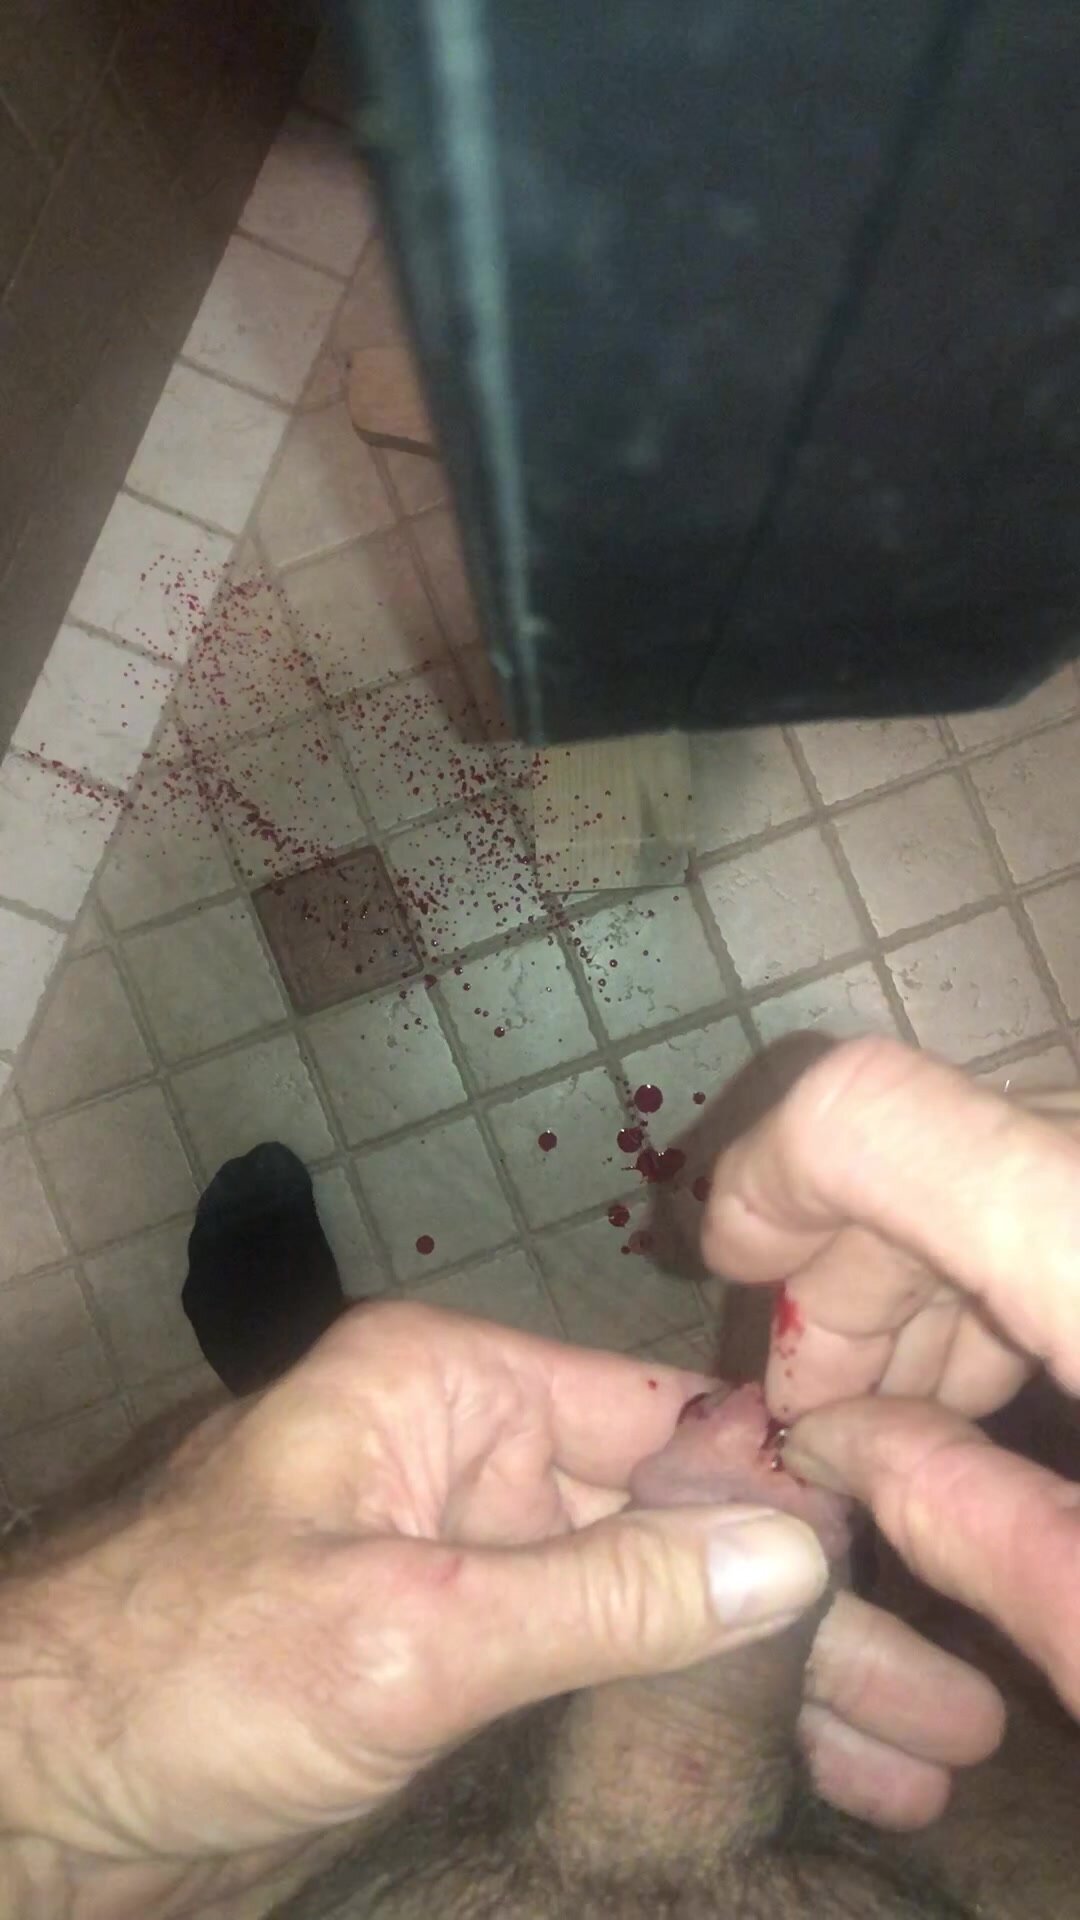 Staples removed from cock head